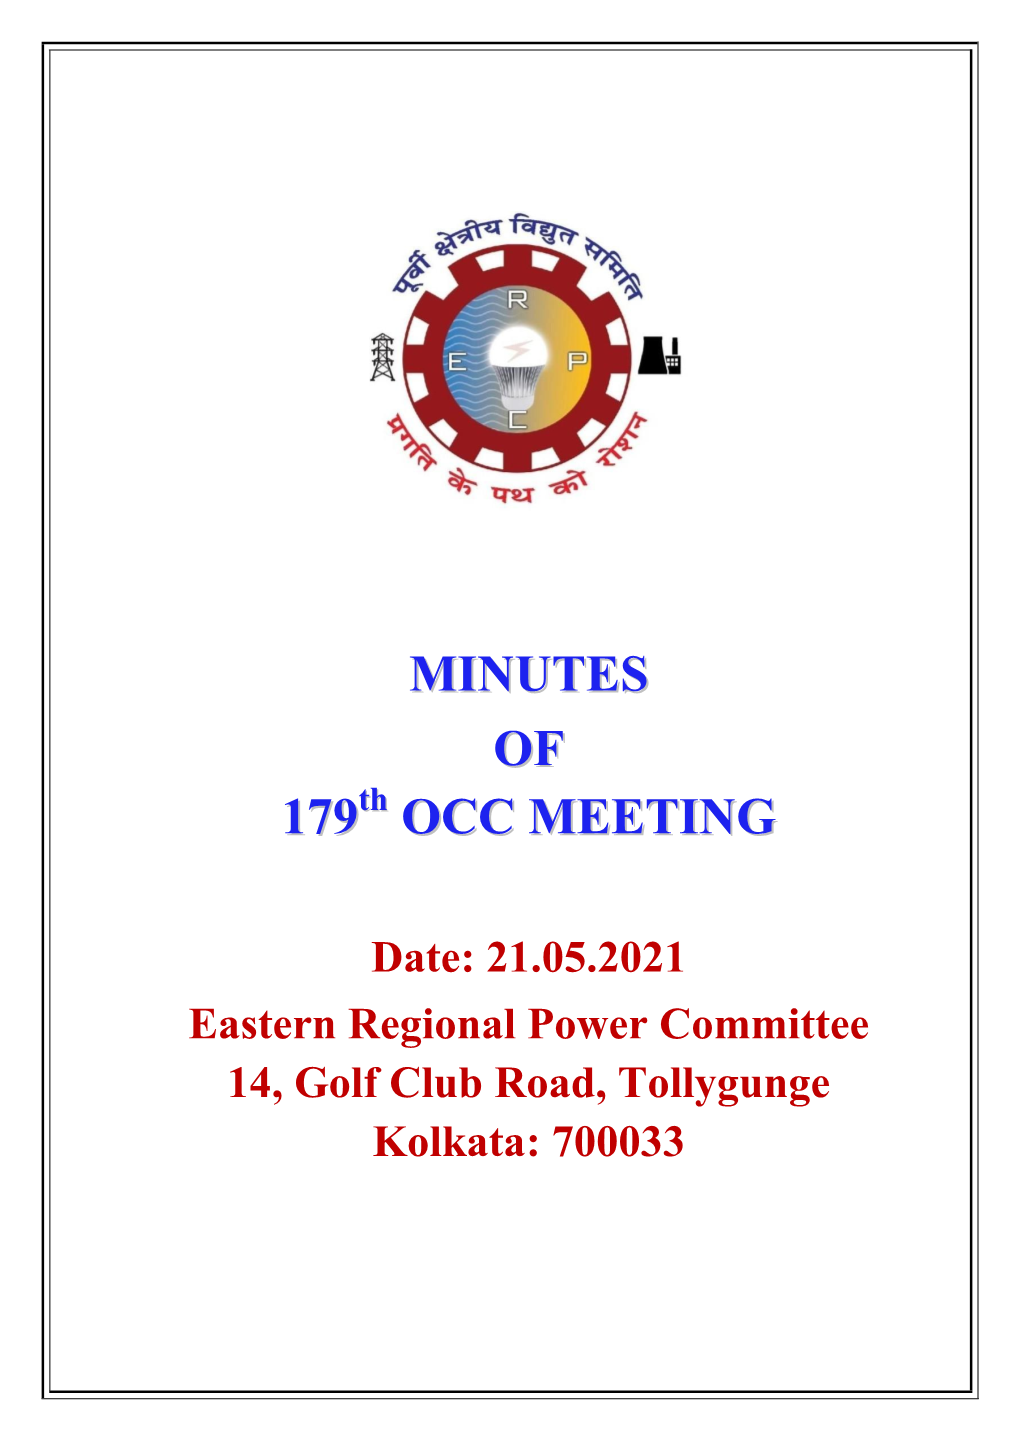 MINUTES of 179Th OCC MEETING HELD on 21.05.2021(FRIDAY) at 10:30 HRS